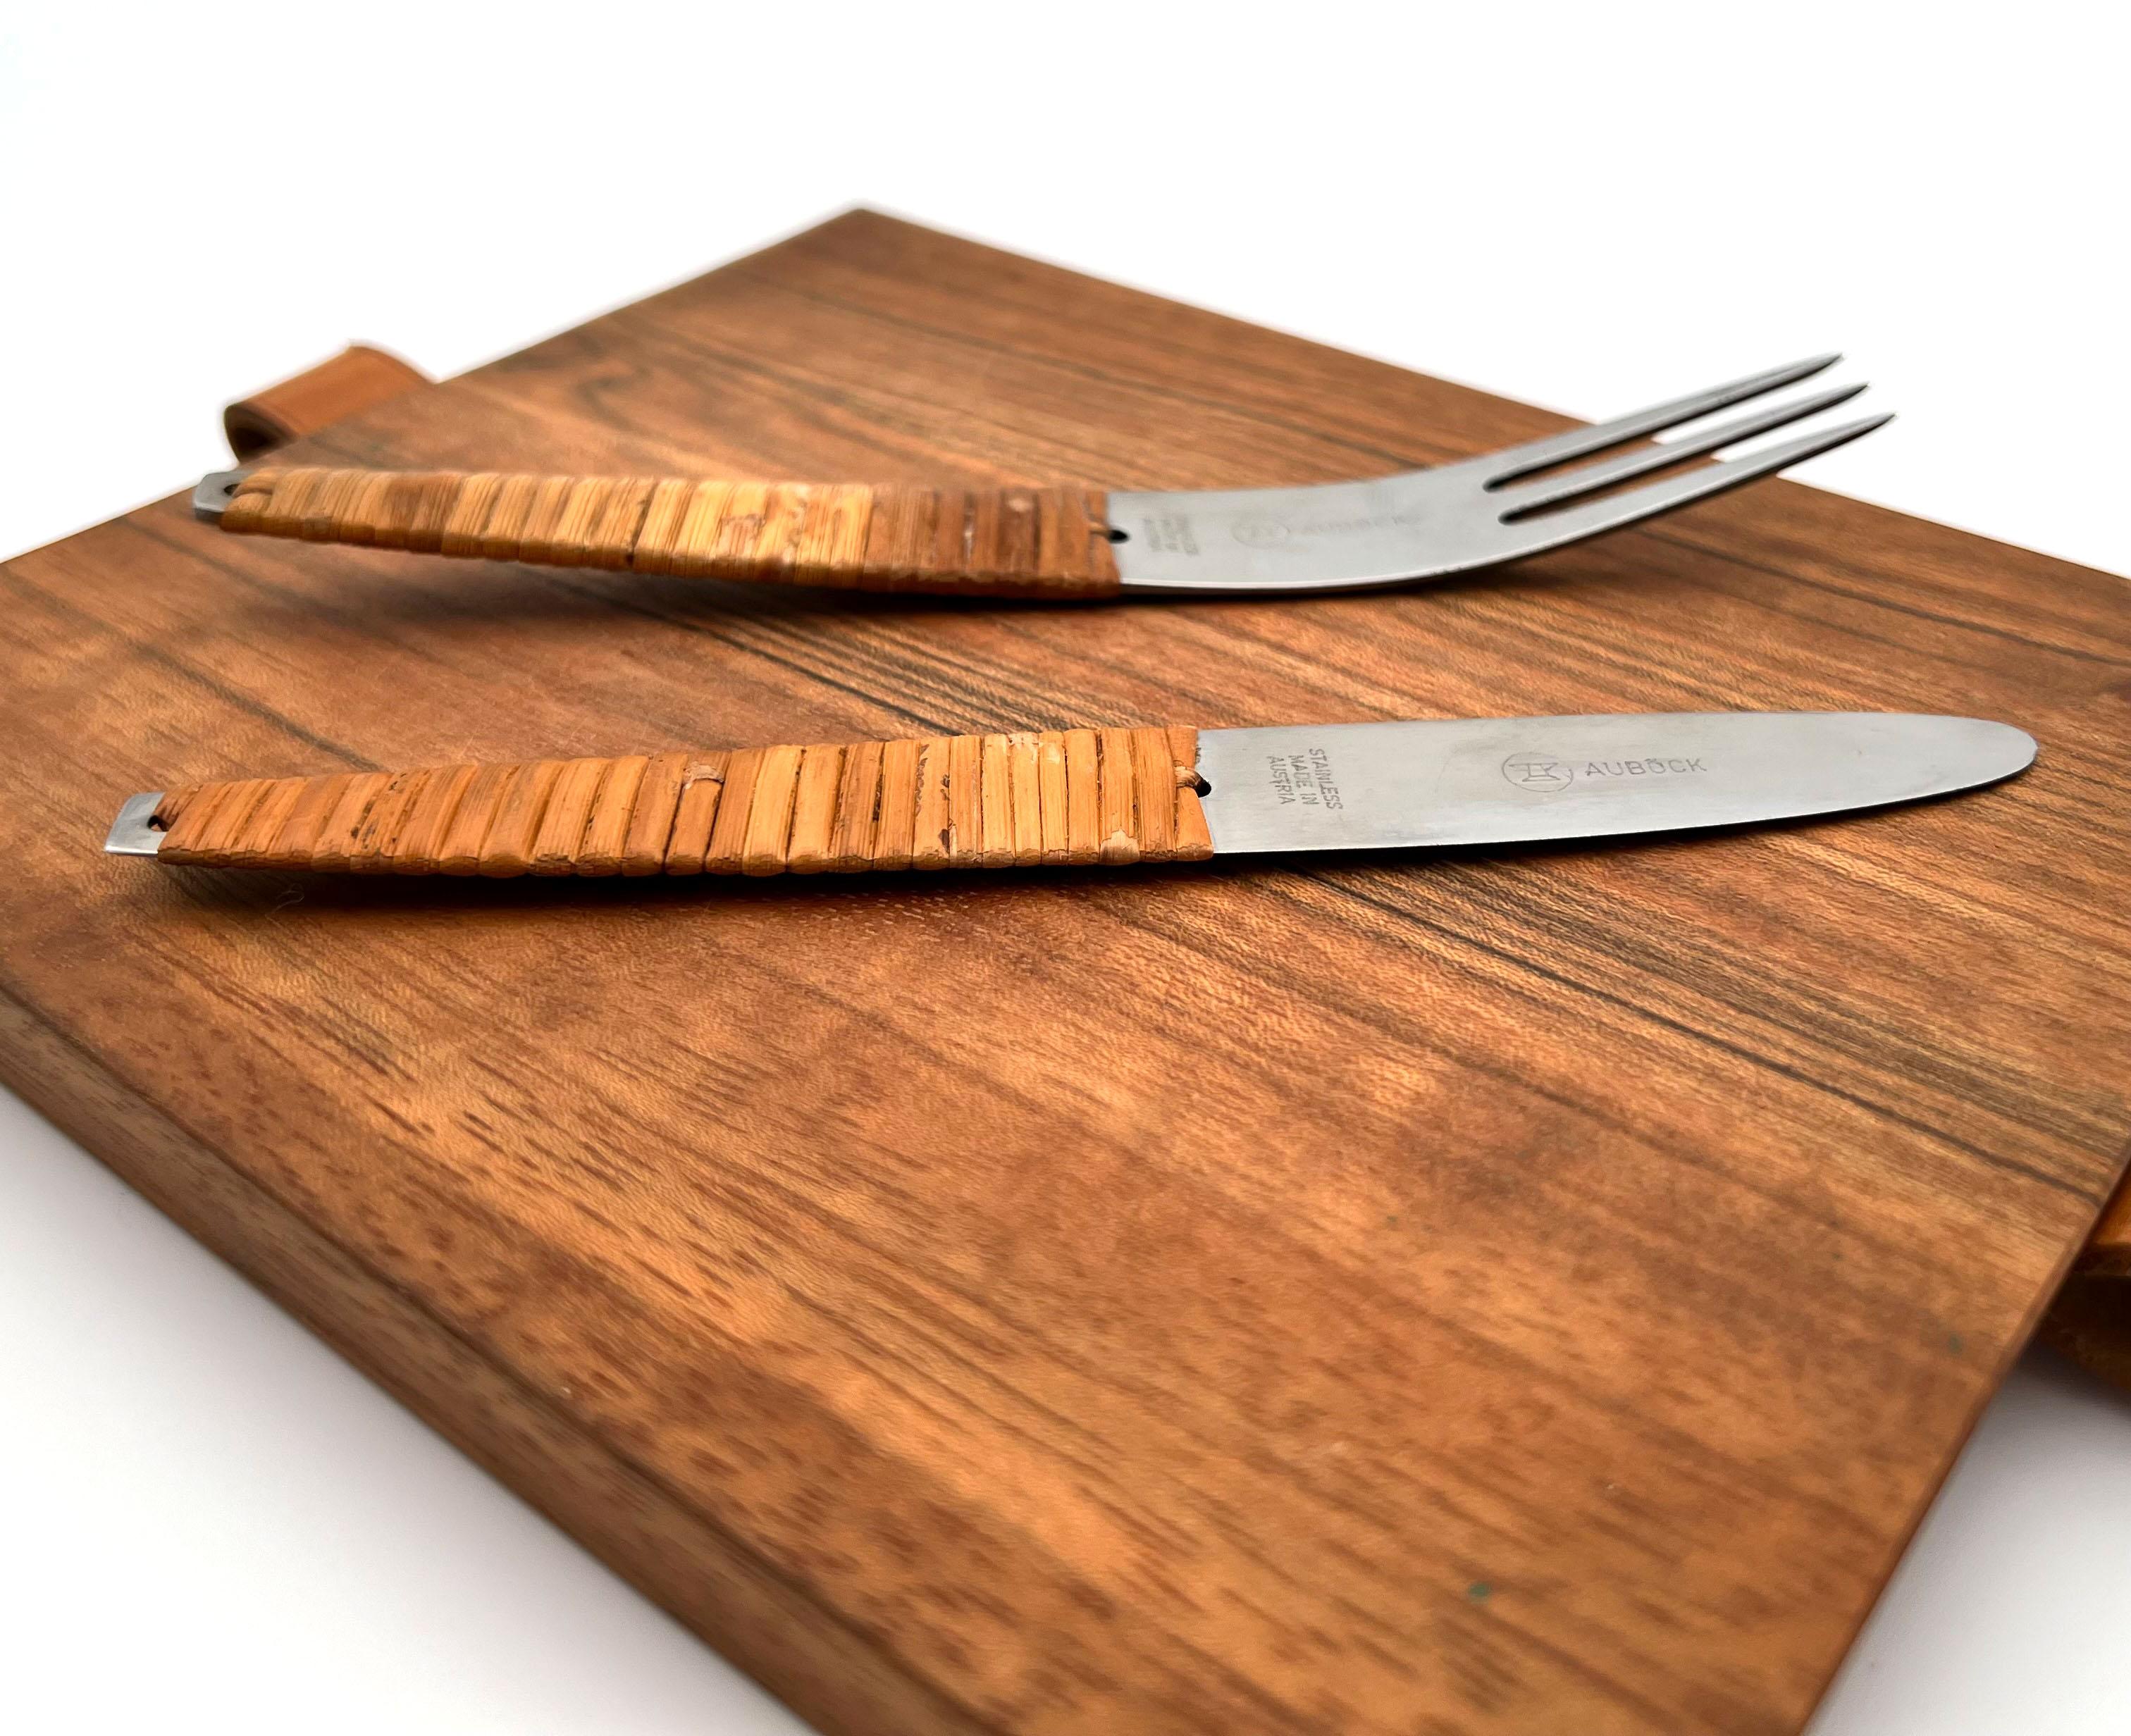 Carl Aubock Cutting Board & Knife and Fork Set. 

Original detailing and finishes, walnut cutting board, stainless steel flatware, rattan wrapped handles, leather strap.

Stamped signature to blade: “Auböck